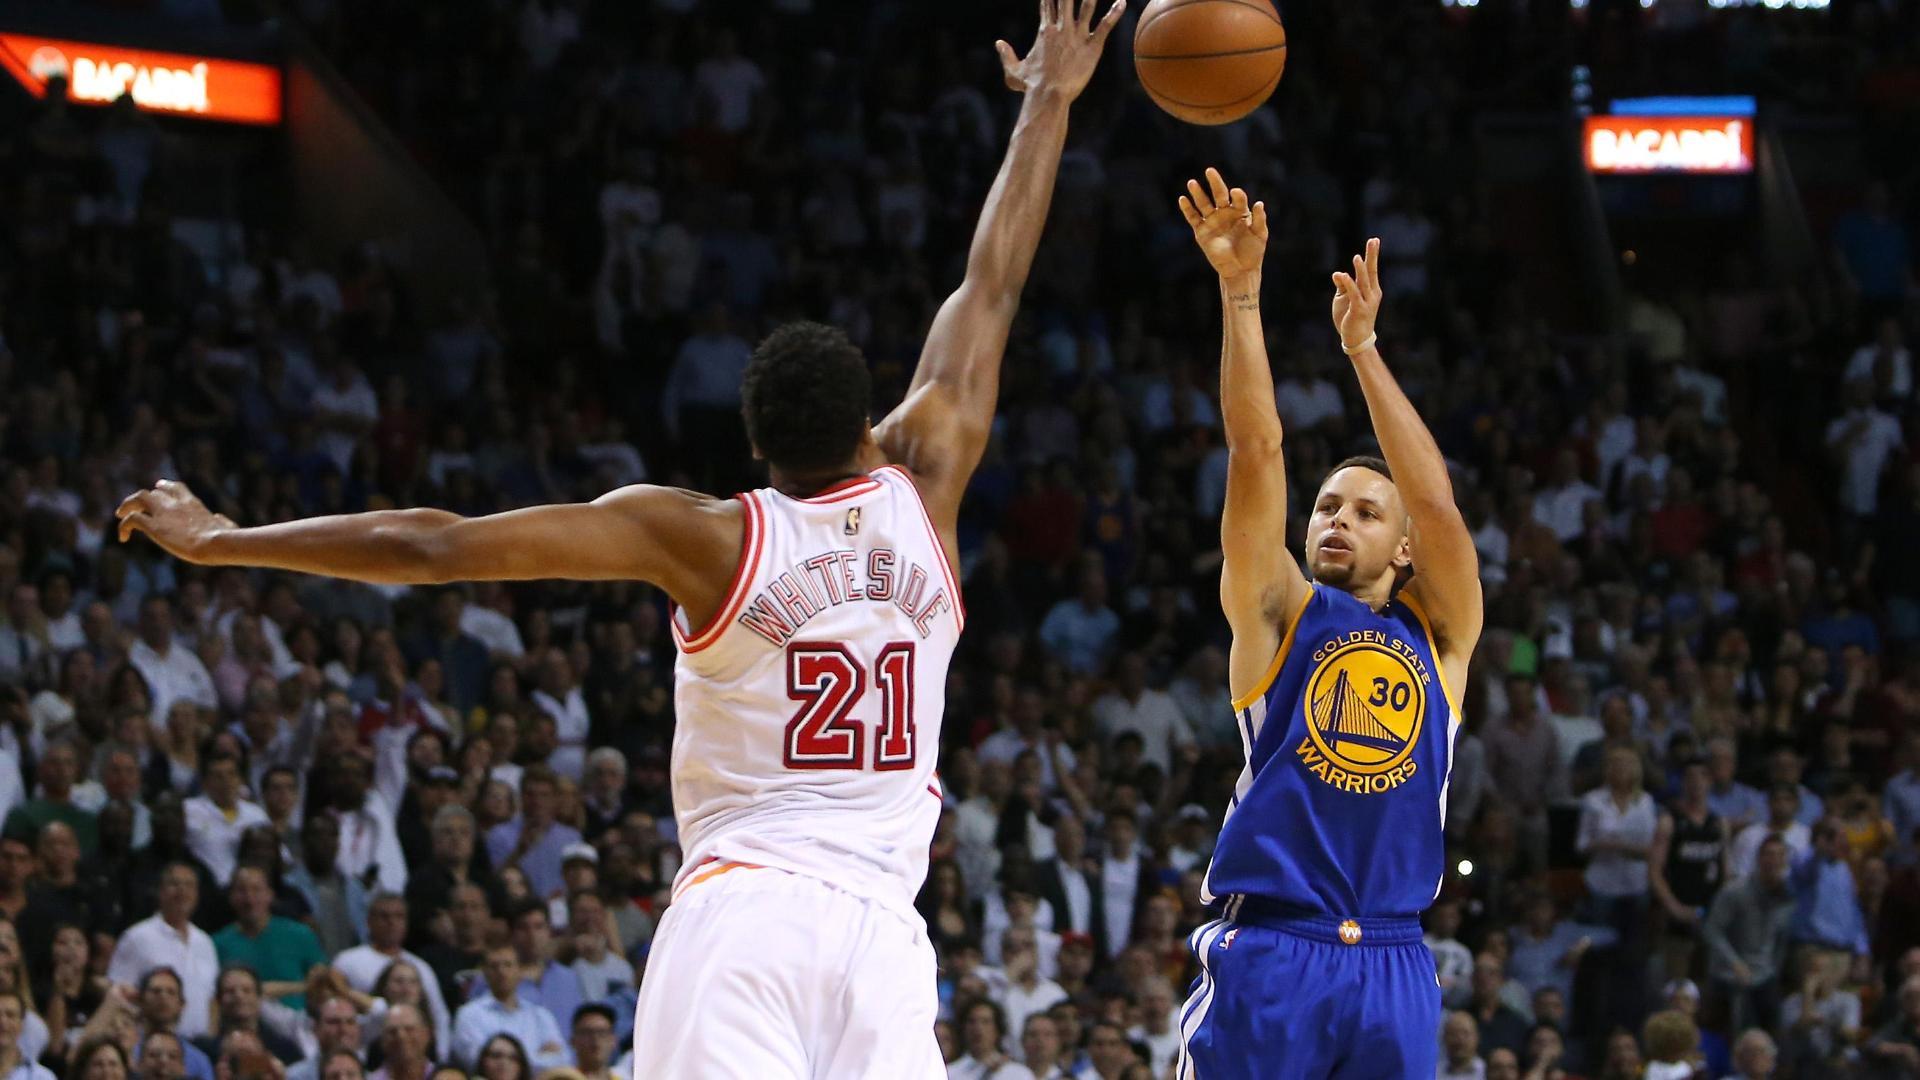 Curry won't let Whiteside's block party stop his 3s Video